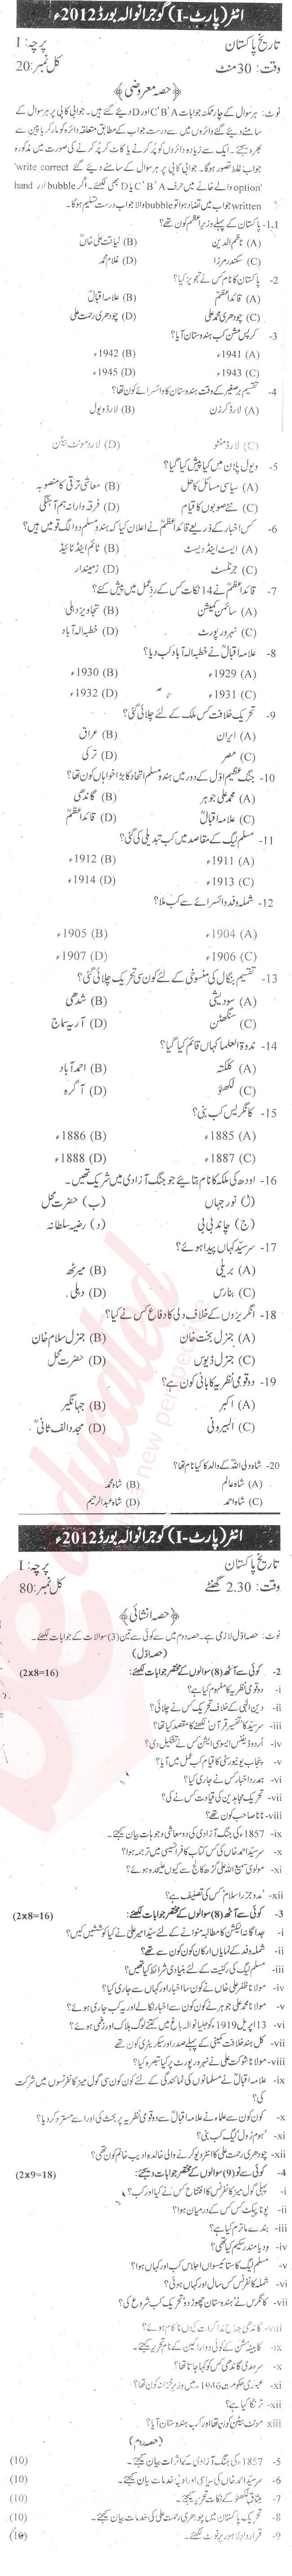 Pakistan History FA Part 1 Past Paper Group 1 BISE Gujranwala 2012